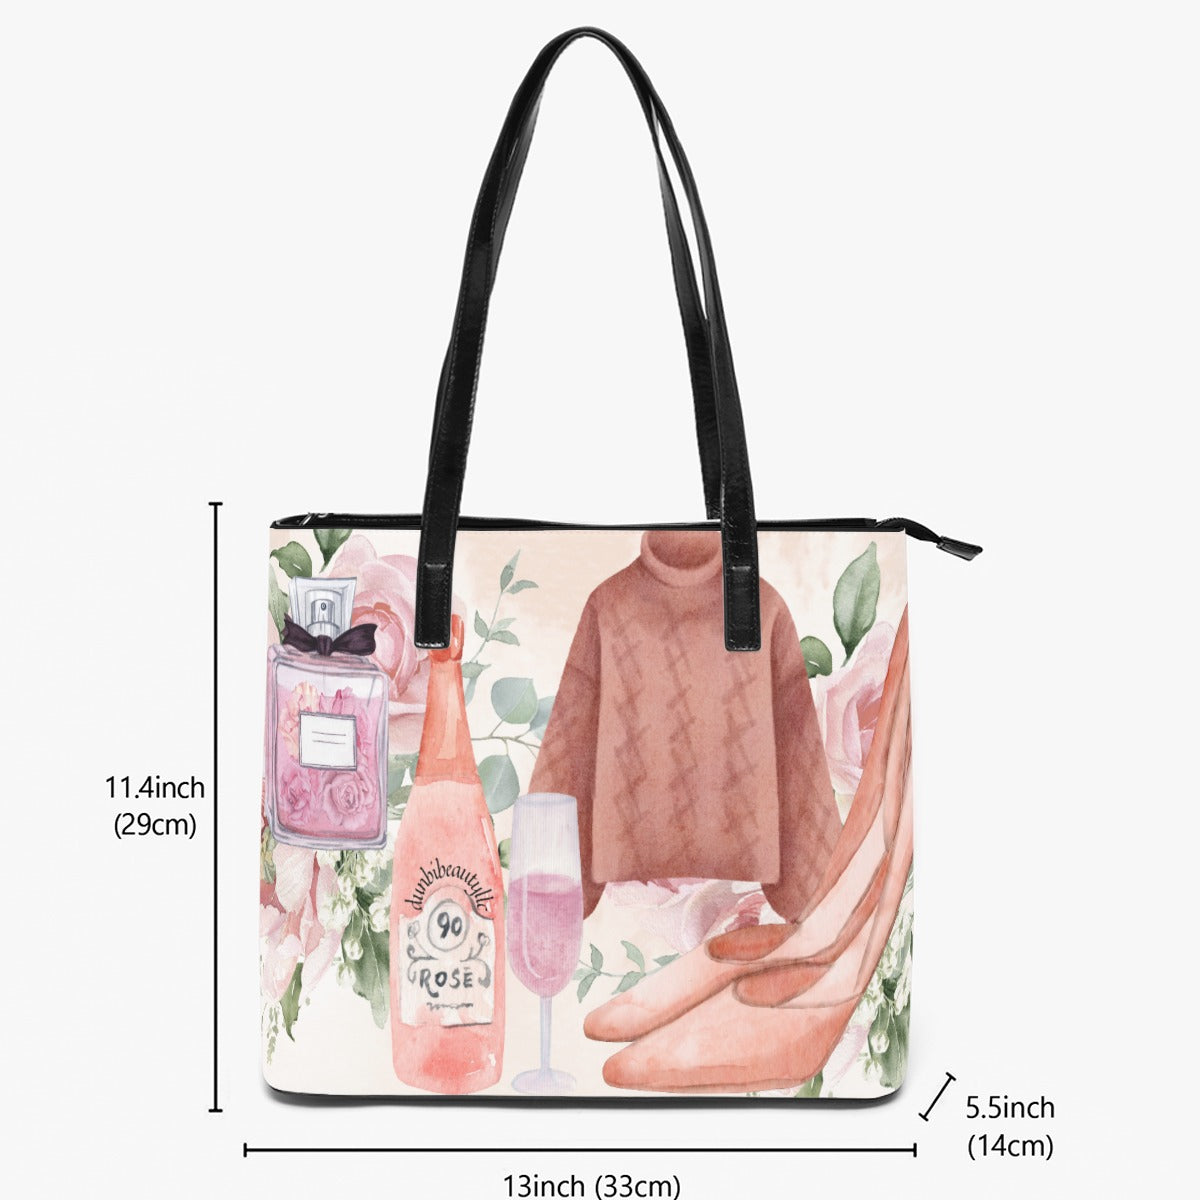 Double-Side Printing PU Tote Bag  Dusty Rose, Pink, Perfume, High Heels Champagne & Roses, Aesthetic, Feminine, Fashion (Designed by Dunbi)